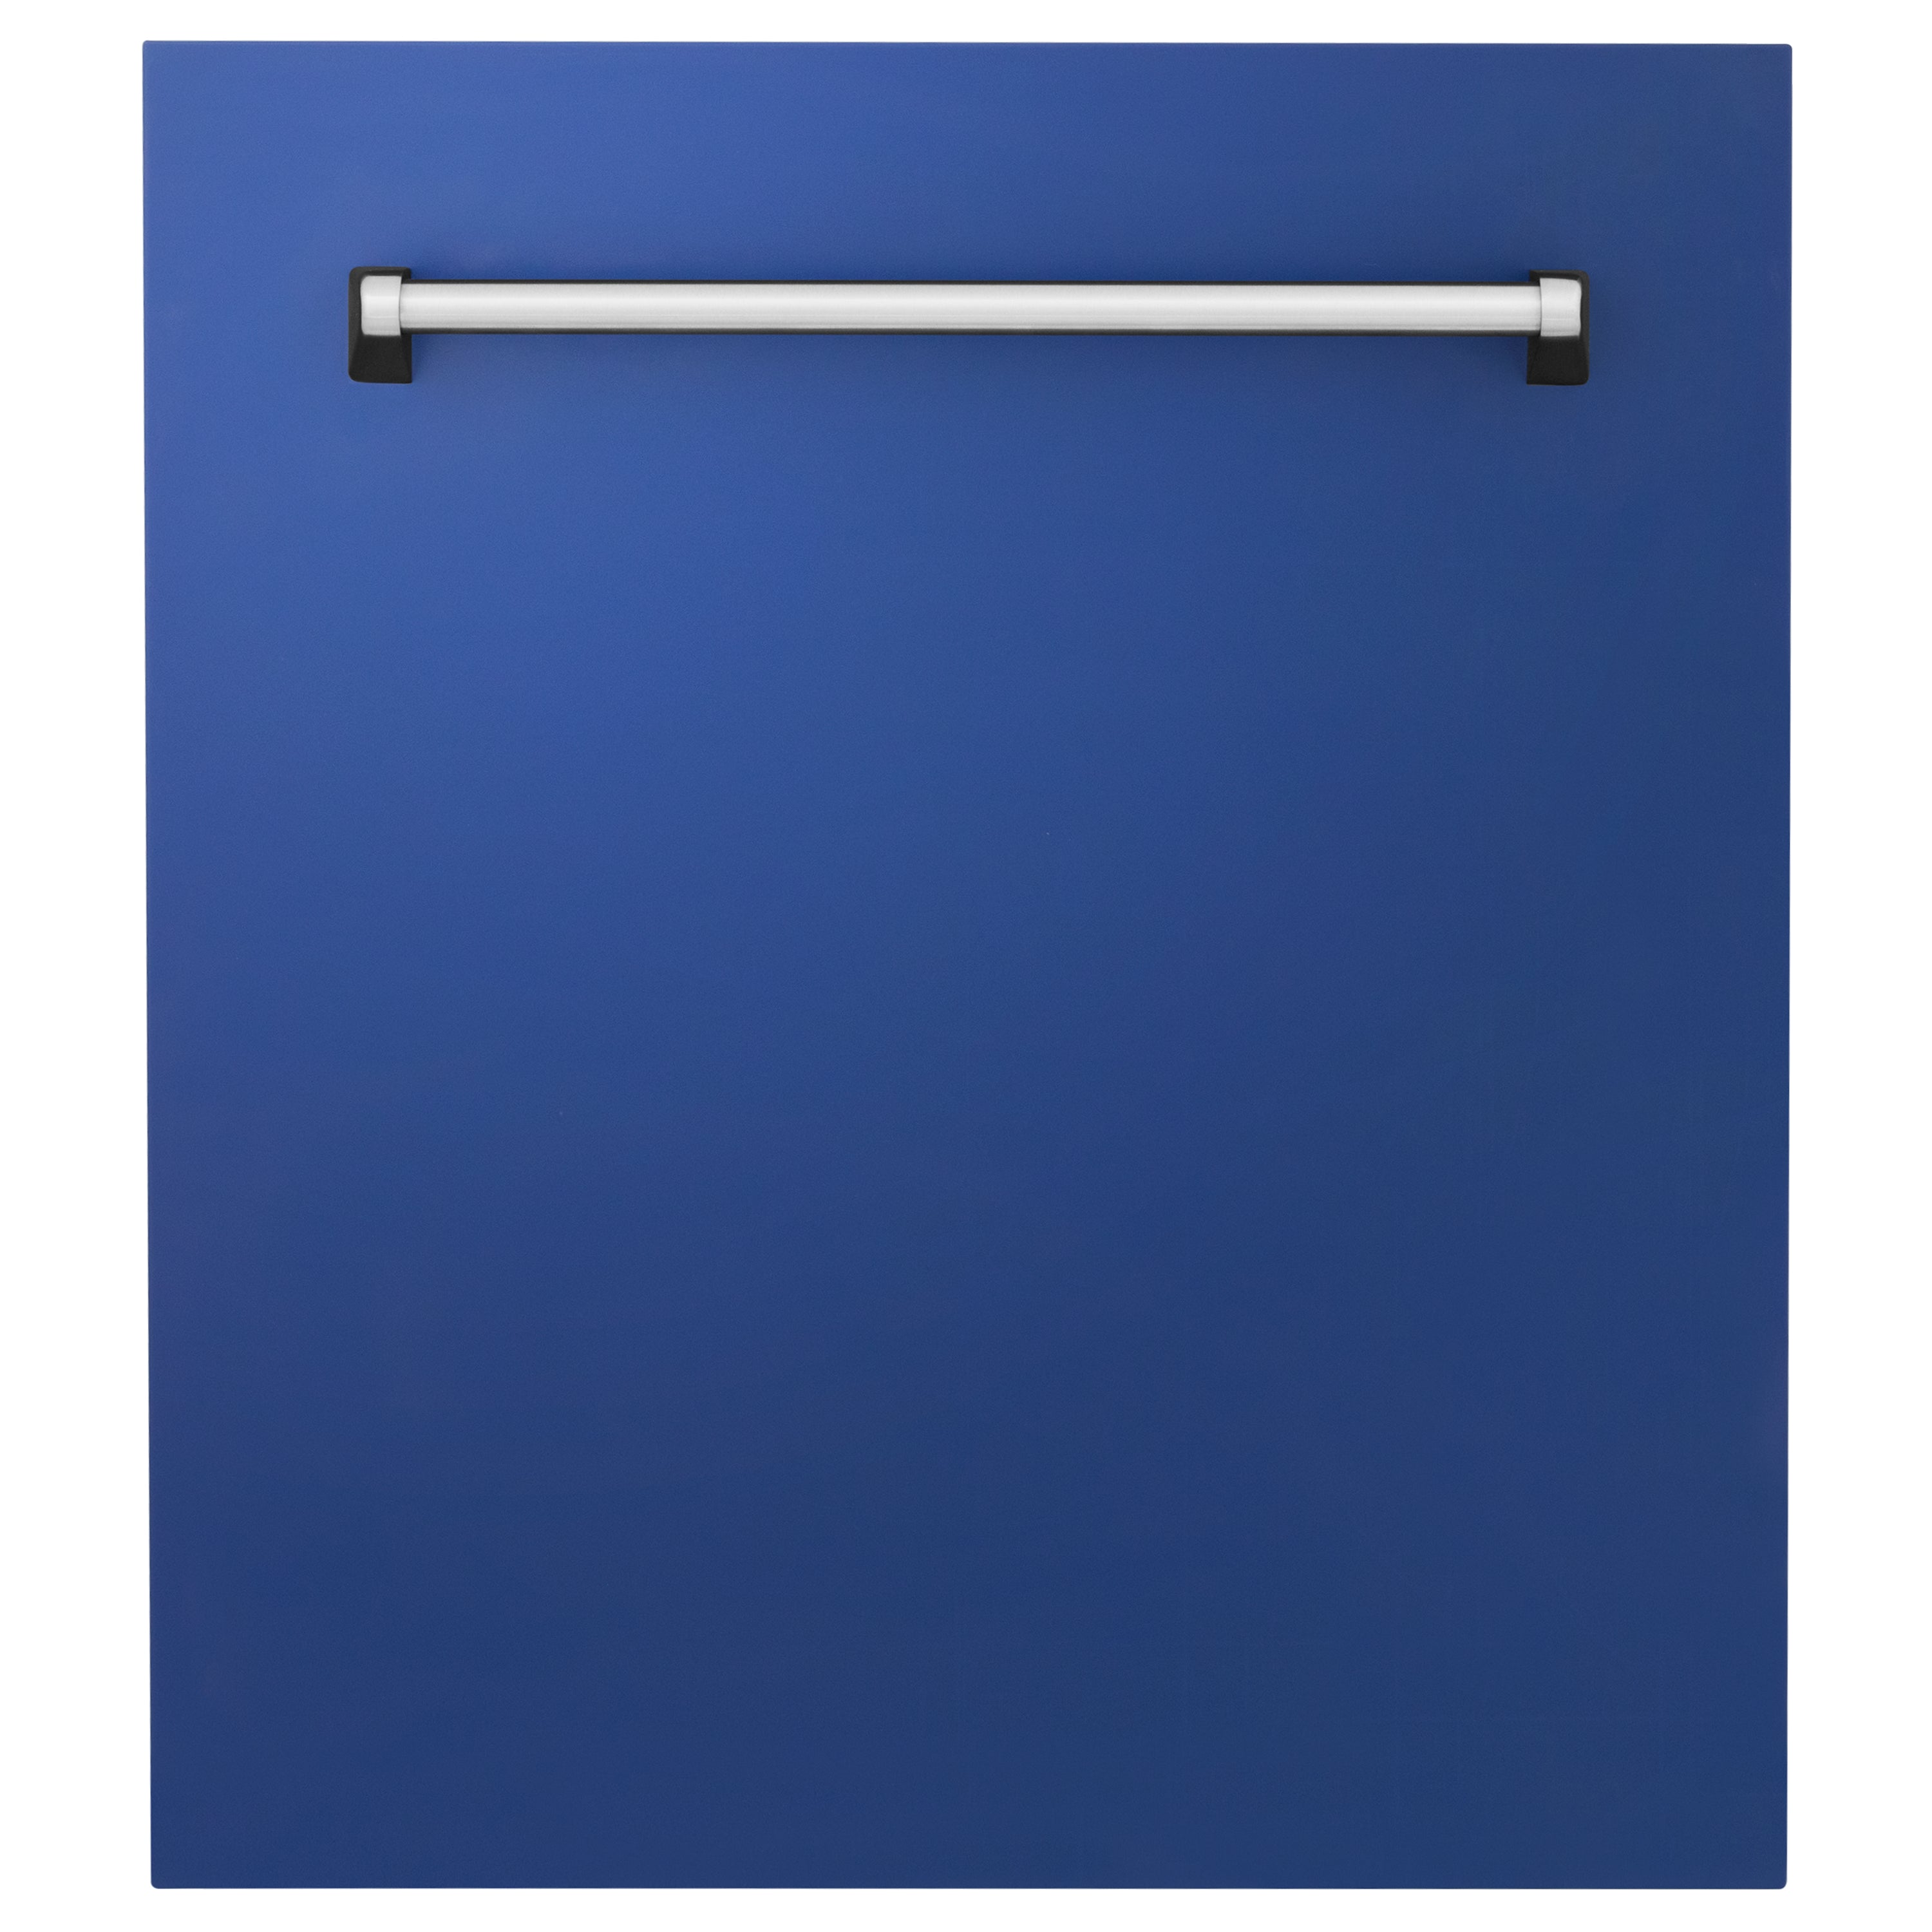 ZLINE 24" Tallac Dishwasher Panel in Blue Matte with Traditional Handle (DPV-BM-24)